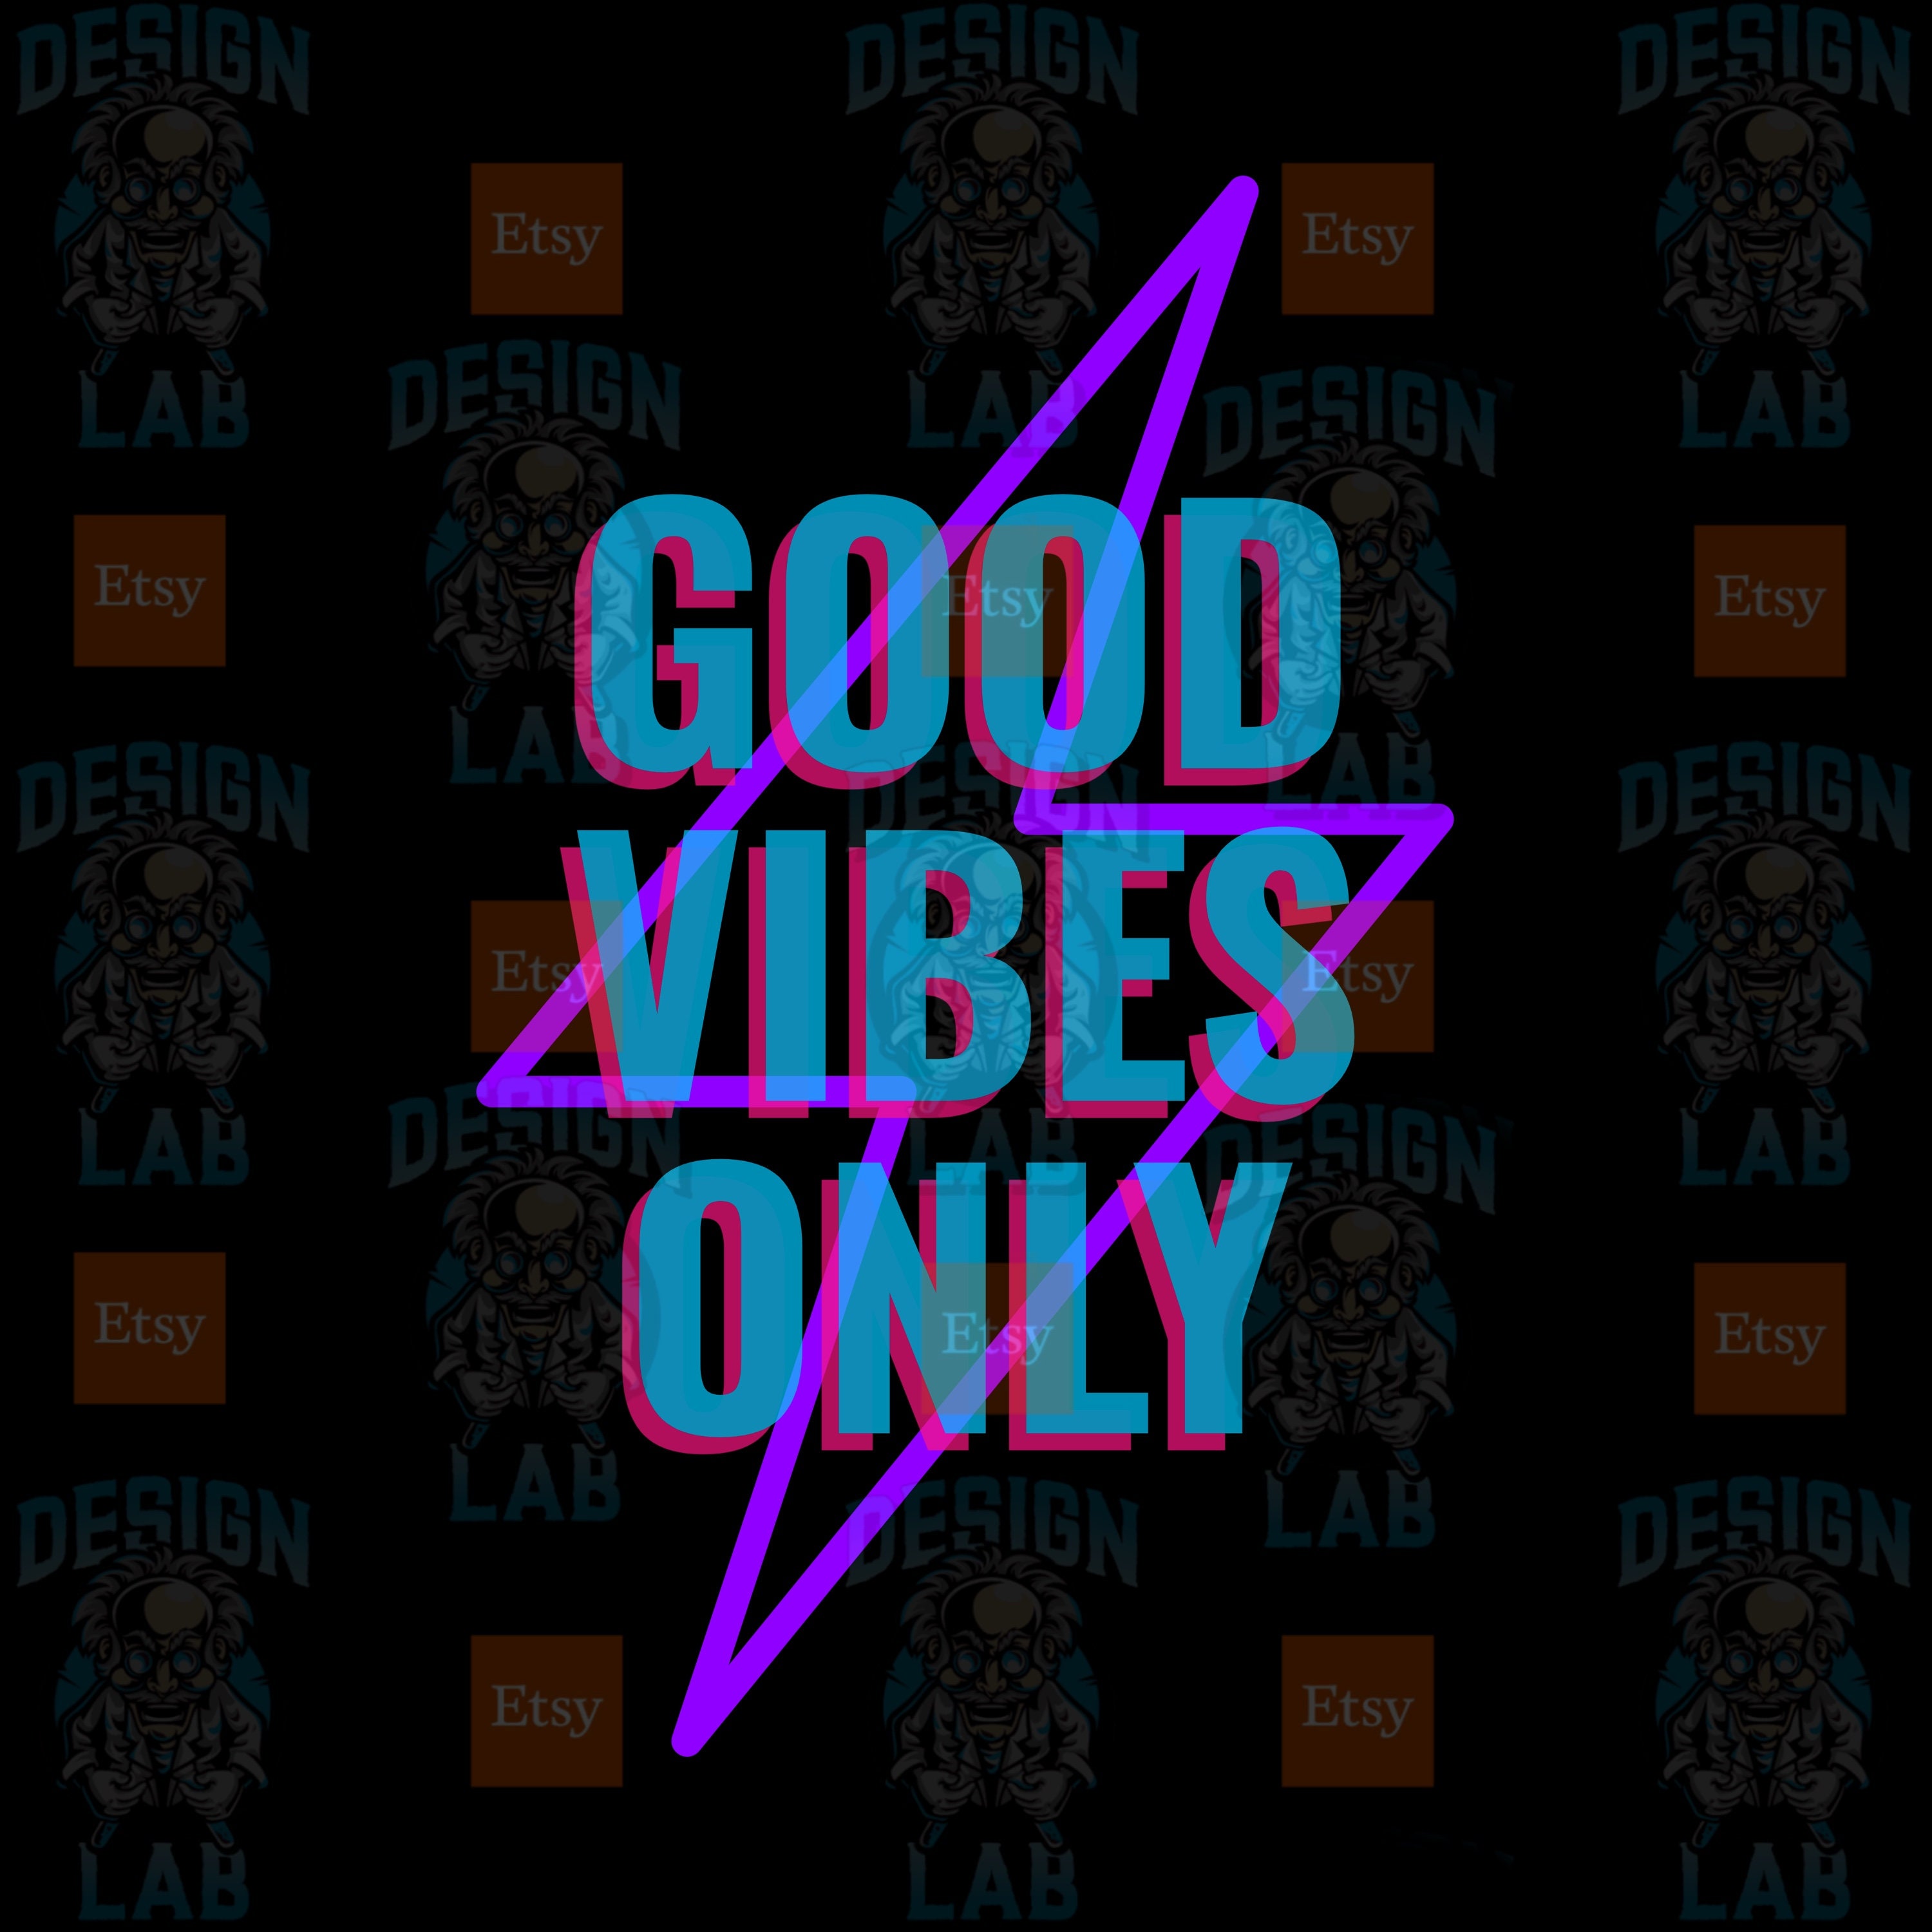 Good Vibes Only Neon Digital Design Download Instant | Etsy